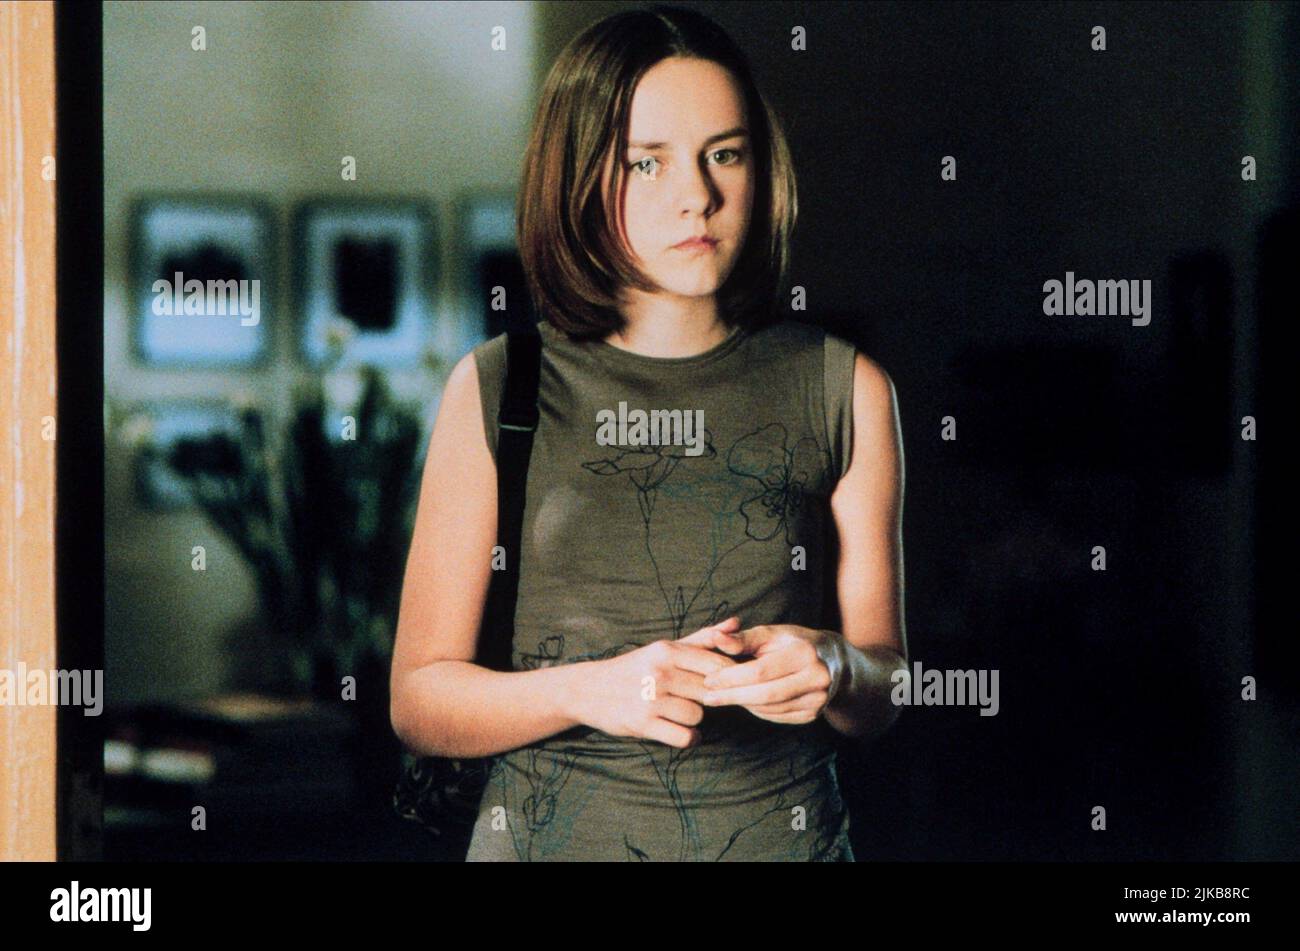 https://c8.alamy.com/comp/2JKB8RC/jena-malone-film-for-love-of-the-game-usa-1999-characters-heather-aubrey-director-sam-raimi-15-september-1999-warning-this-photograph-is-for-editorial-use-only-and-is-the-copyright-of-universal-pictures-andor-the-photographer-assigned-by-the-film-or-production-company-and-can-only-be-reproduced-by-publications-in-conjunction-with-the-promotion-of-the-above-film-a-mandatory-credit-to-universal-pictures-is-required-the-photographer-should-also-be-credited-when-known-no-commercial-use-can-be-granted-without-written-authority-from-the-film-company-2JKB8RC.jpg